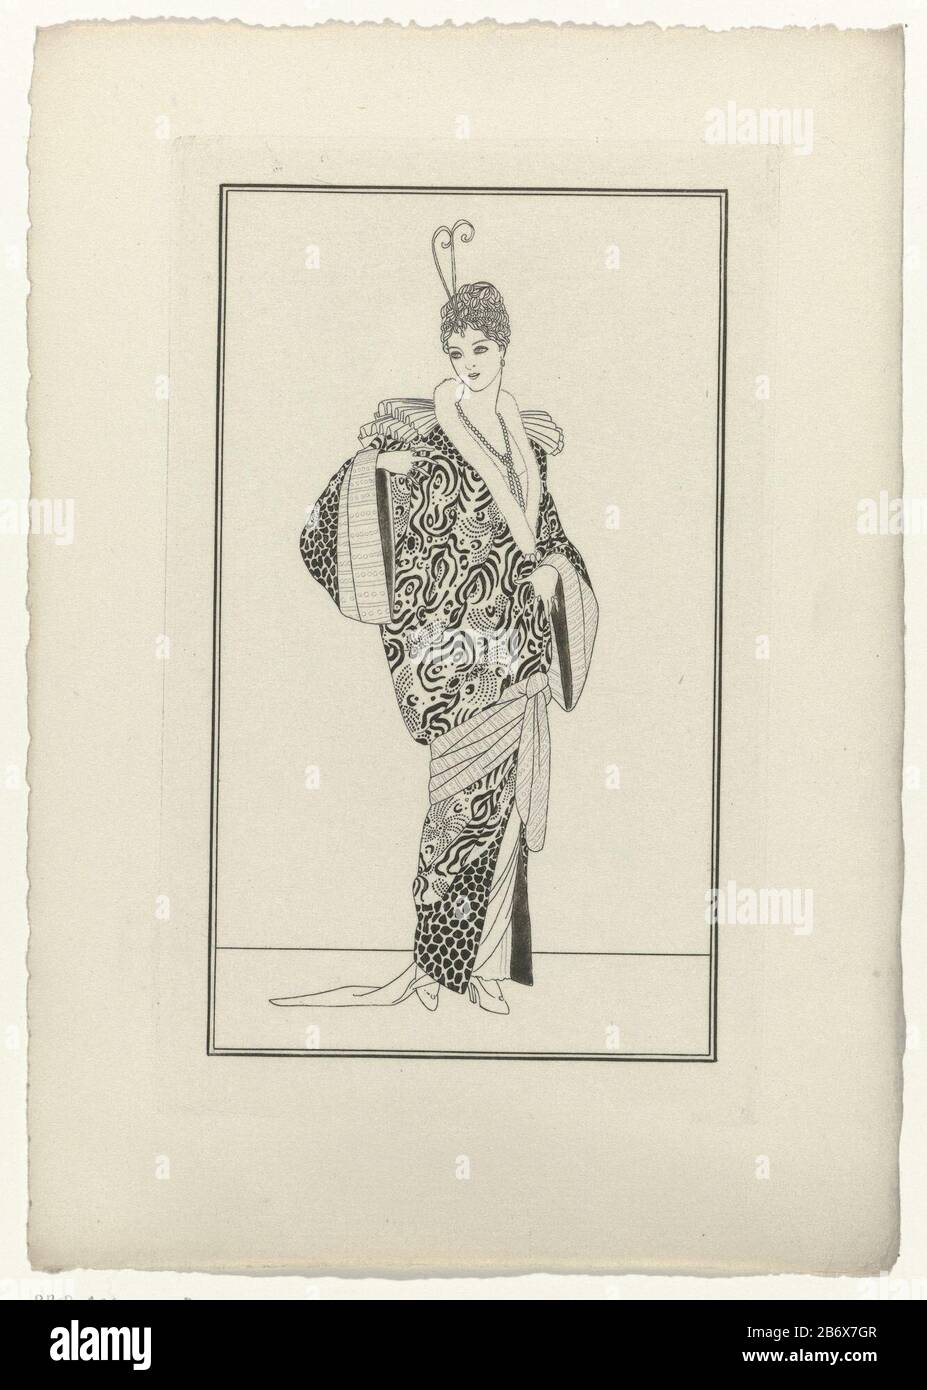 Journal des Dames et des Modes, Costumes Parisiens, 1914, No 139 Journal des Dames et des Modes, Costumes Parisiens, 1914, No. 139 Object Type : fashion picture Item number: RP-P-2009-1712BCatalogusreferentie: 1 (3) Note: three states in the collection of the Rijksmuseum description: Evening Mantle crushed velvet decorated with silk brocade with silver (wire). Proof of a picture from fashion magazine Journal des Dames et des Modes (1912-1914). On version with text caption: Manteau du soir and velvet frappe garni de soie brochée d'argent. Manufacturer : printmaker: anonymous Date: 1914 Physical Stock Photo